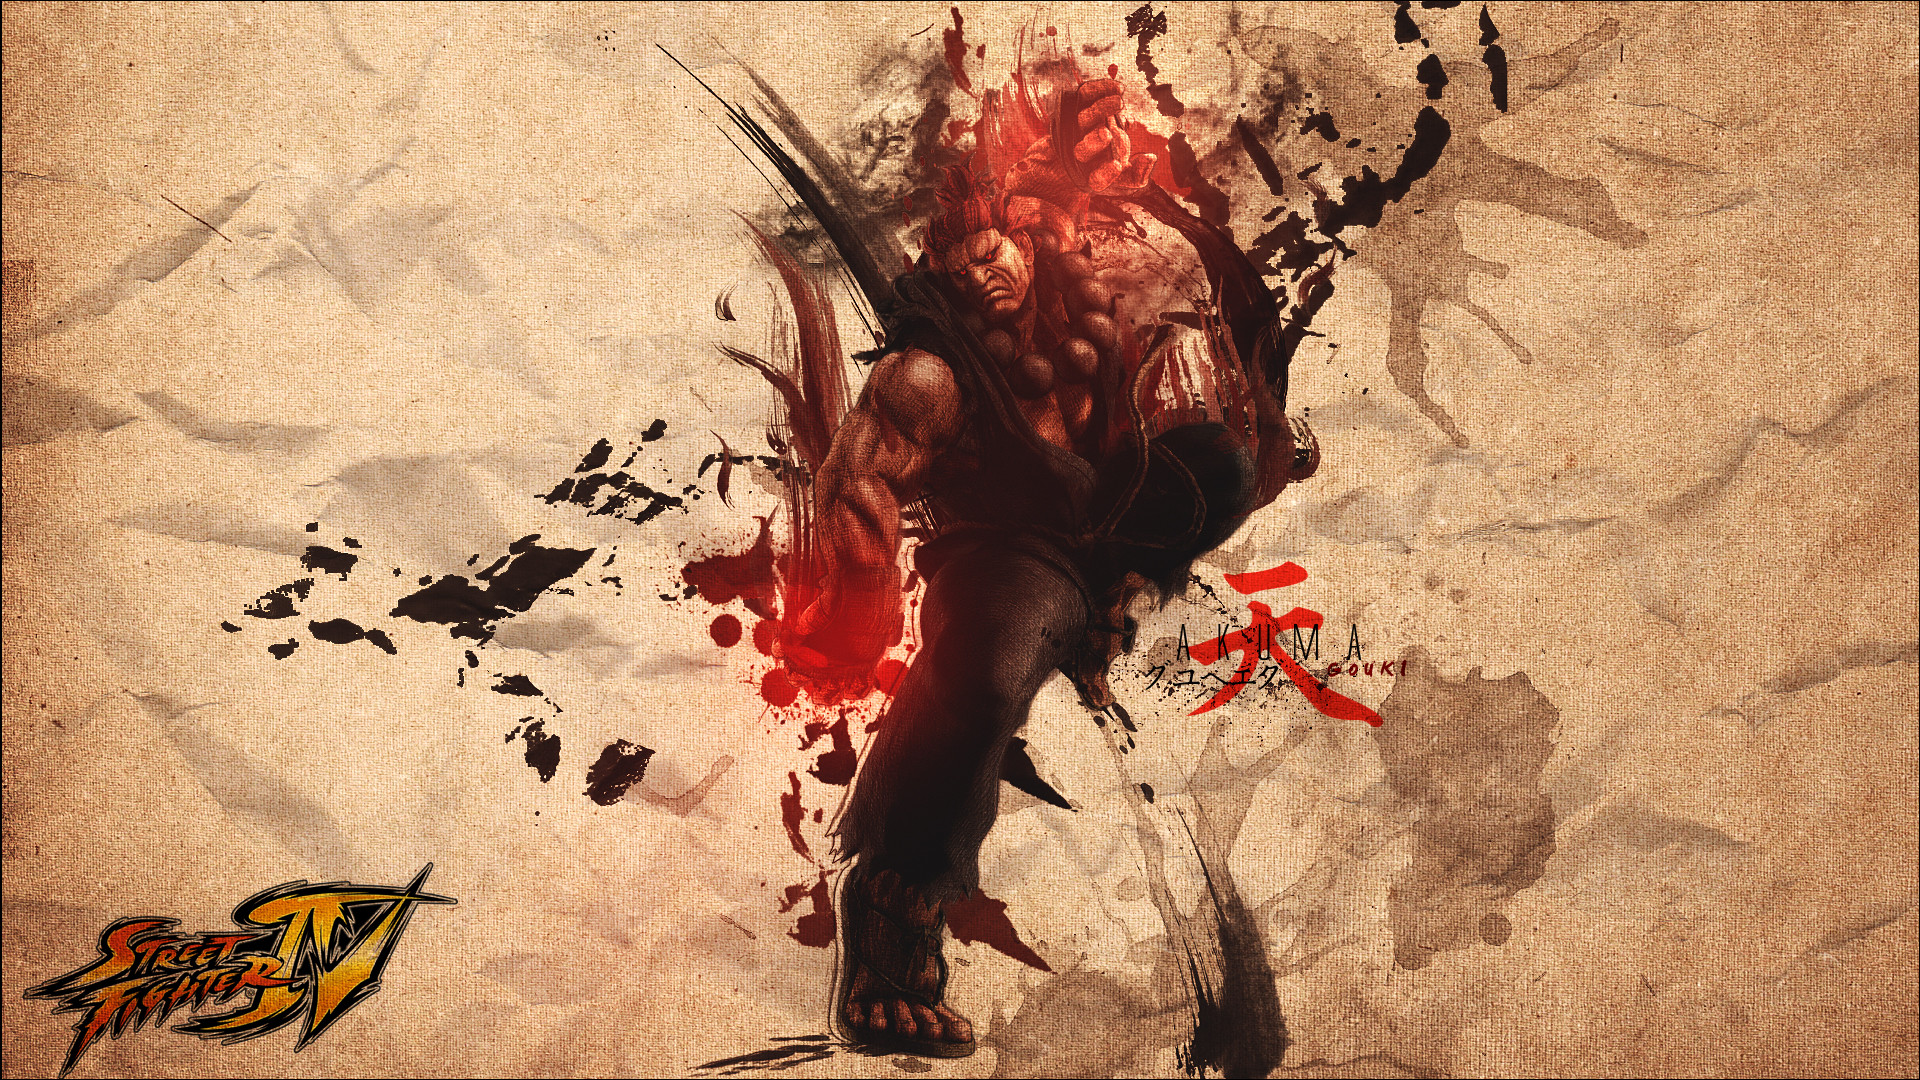 1920x1080 hd akuma street fighter background amazing images cool windows wallpapers  free images desktop backgrounds high quality artworks dual monitors  1920Ã1080 ...